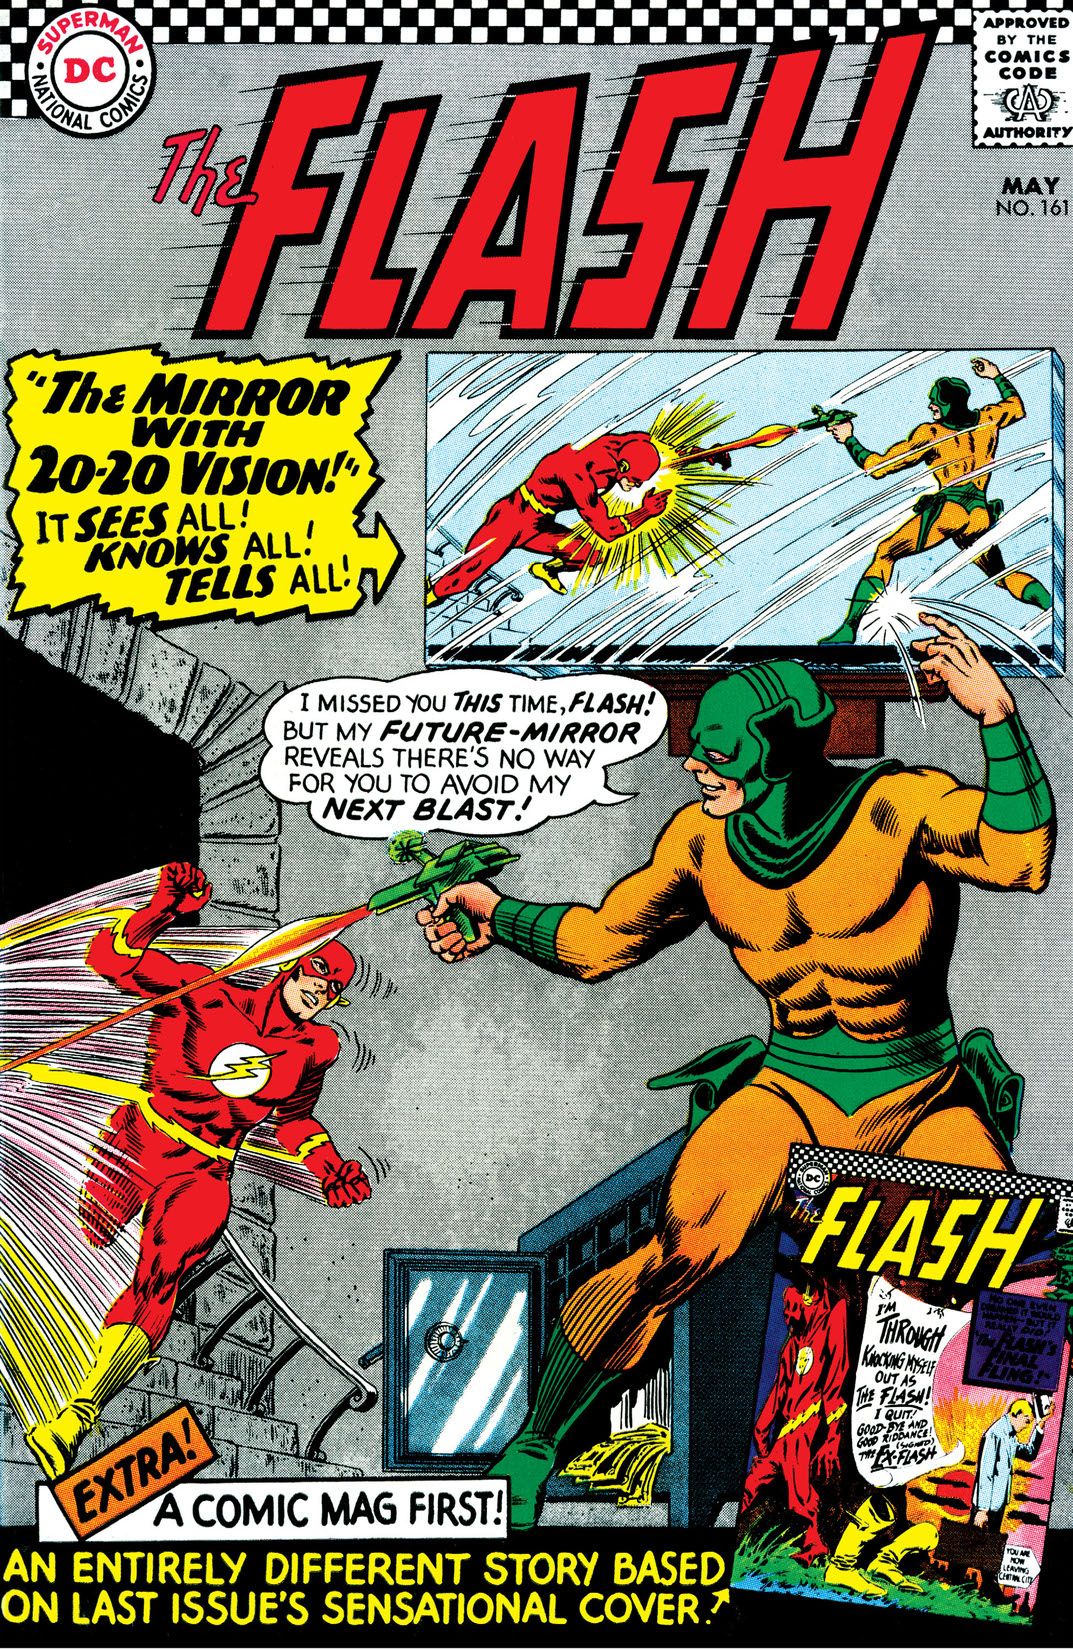 The Flash (1959-) #161 preview images